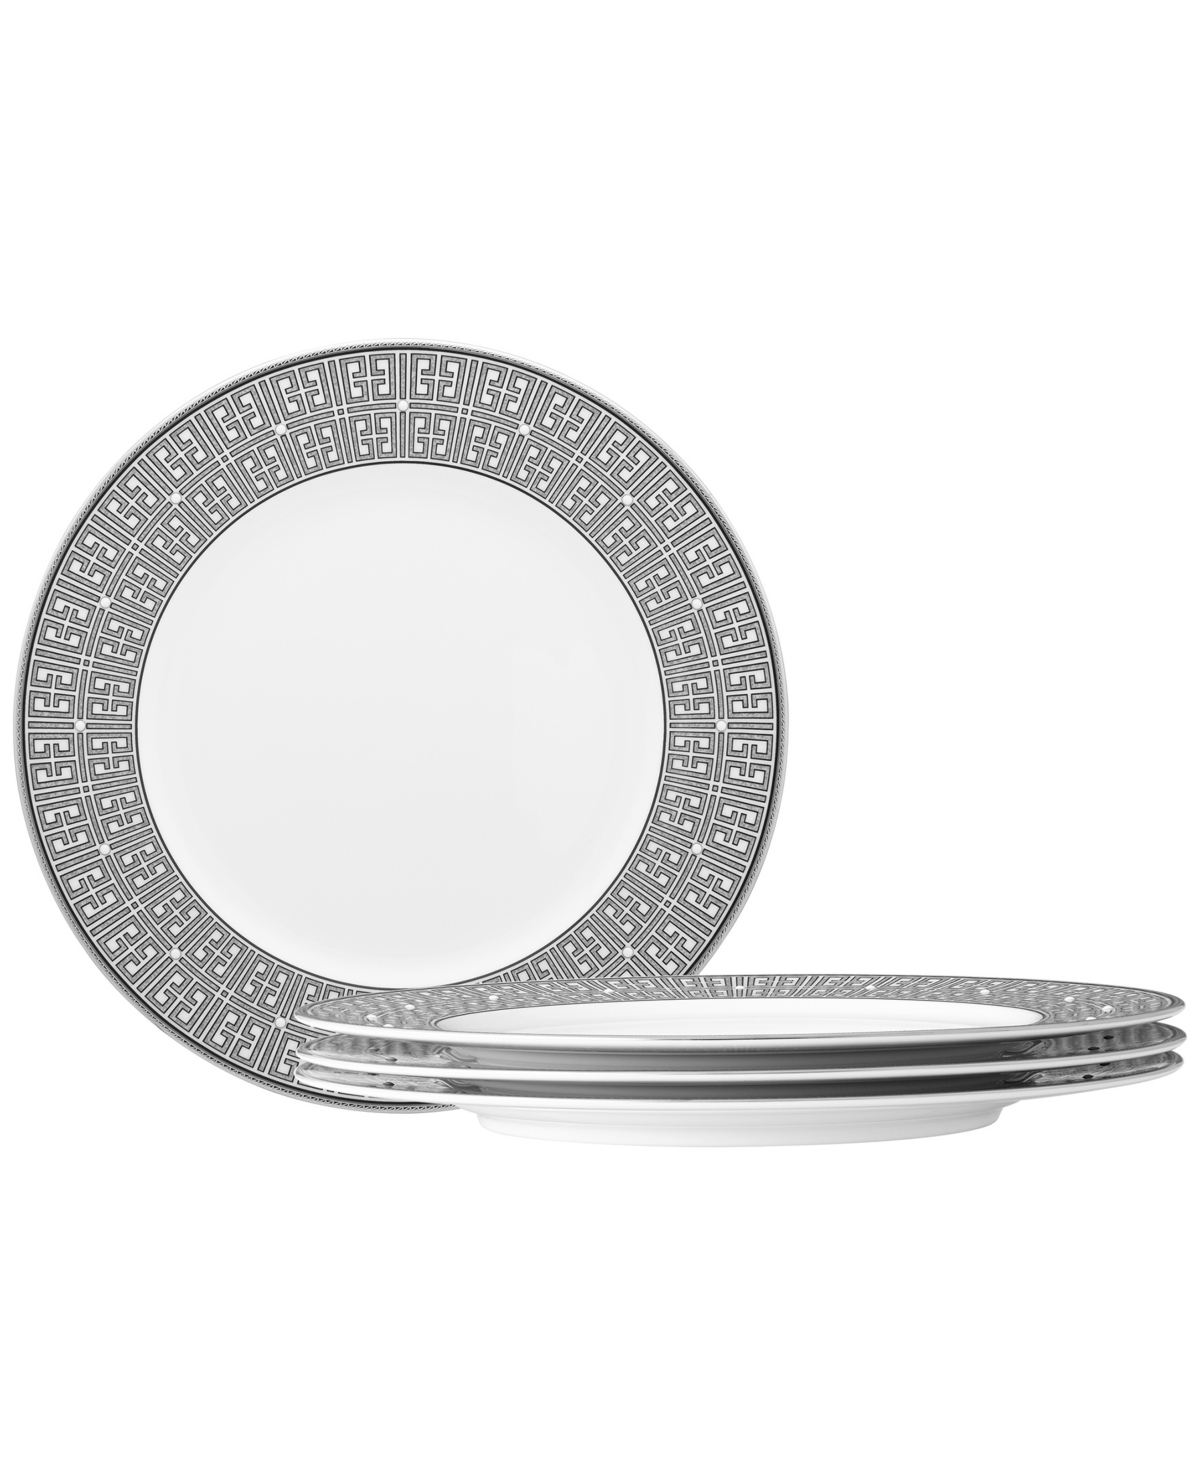 Noritake Infinity 4 Piece Dinner Plate Set, Service For 4 In Graphite